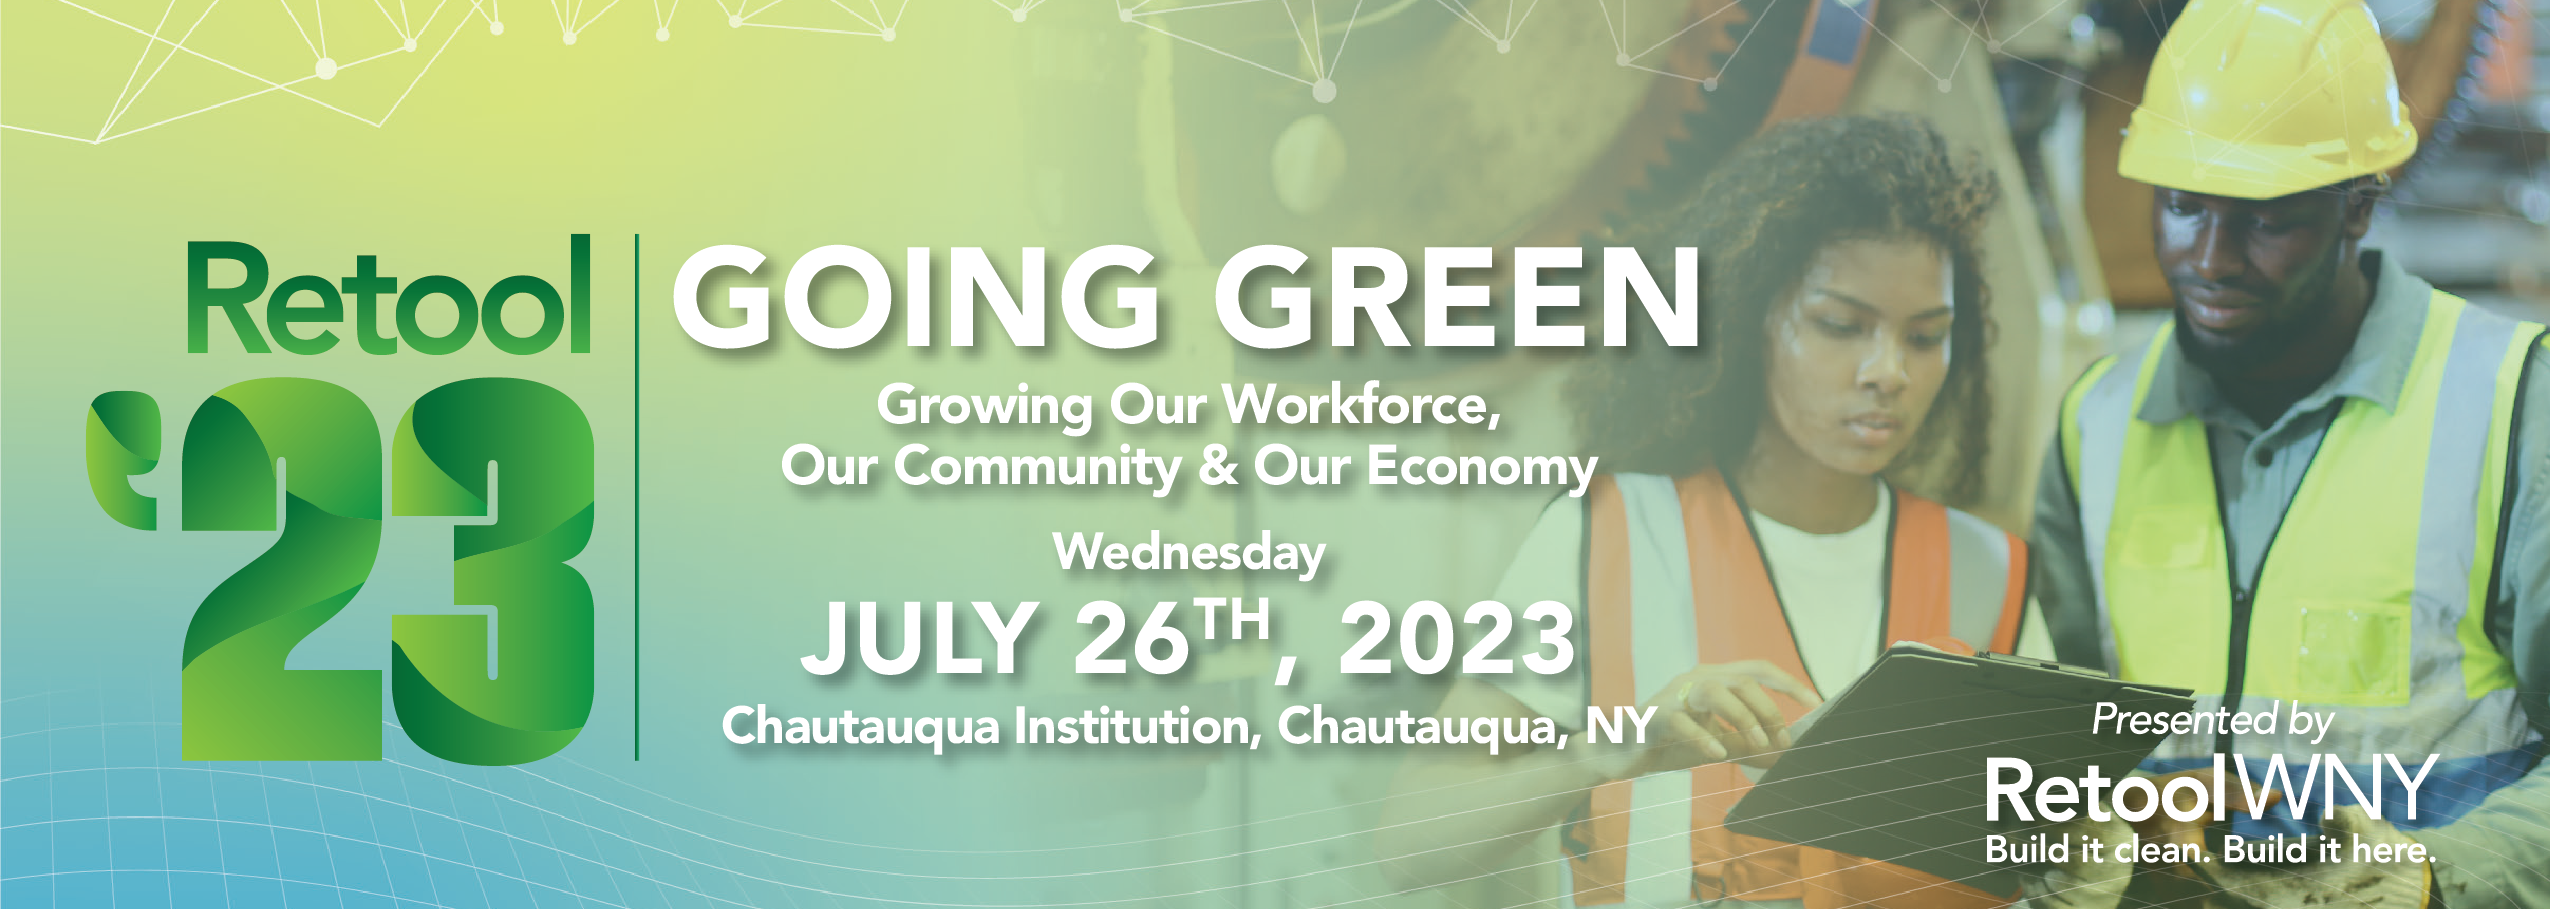 Going Green: Growing our Workforce, Our Community & Our Economy